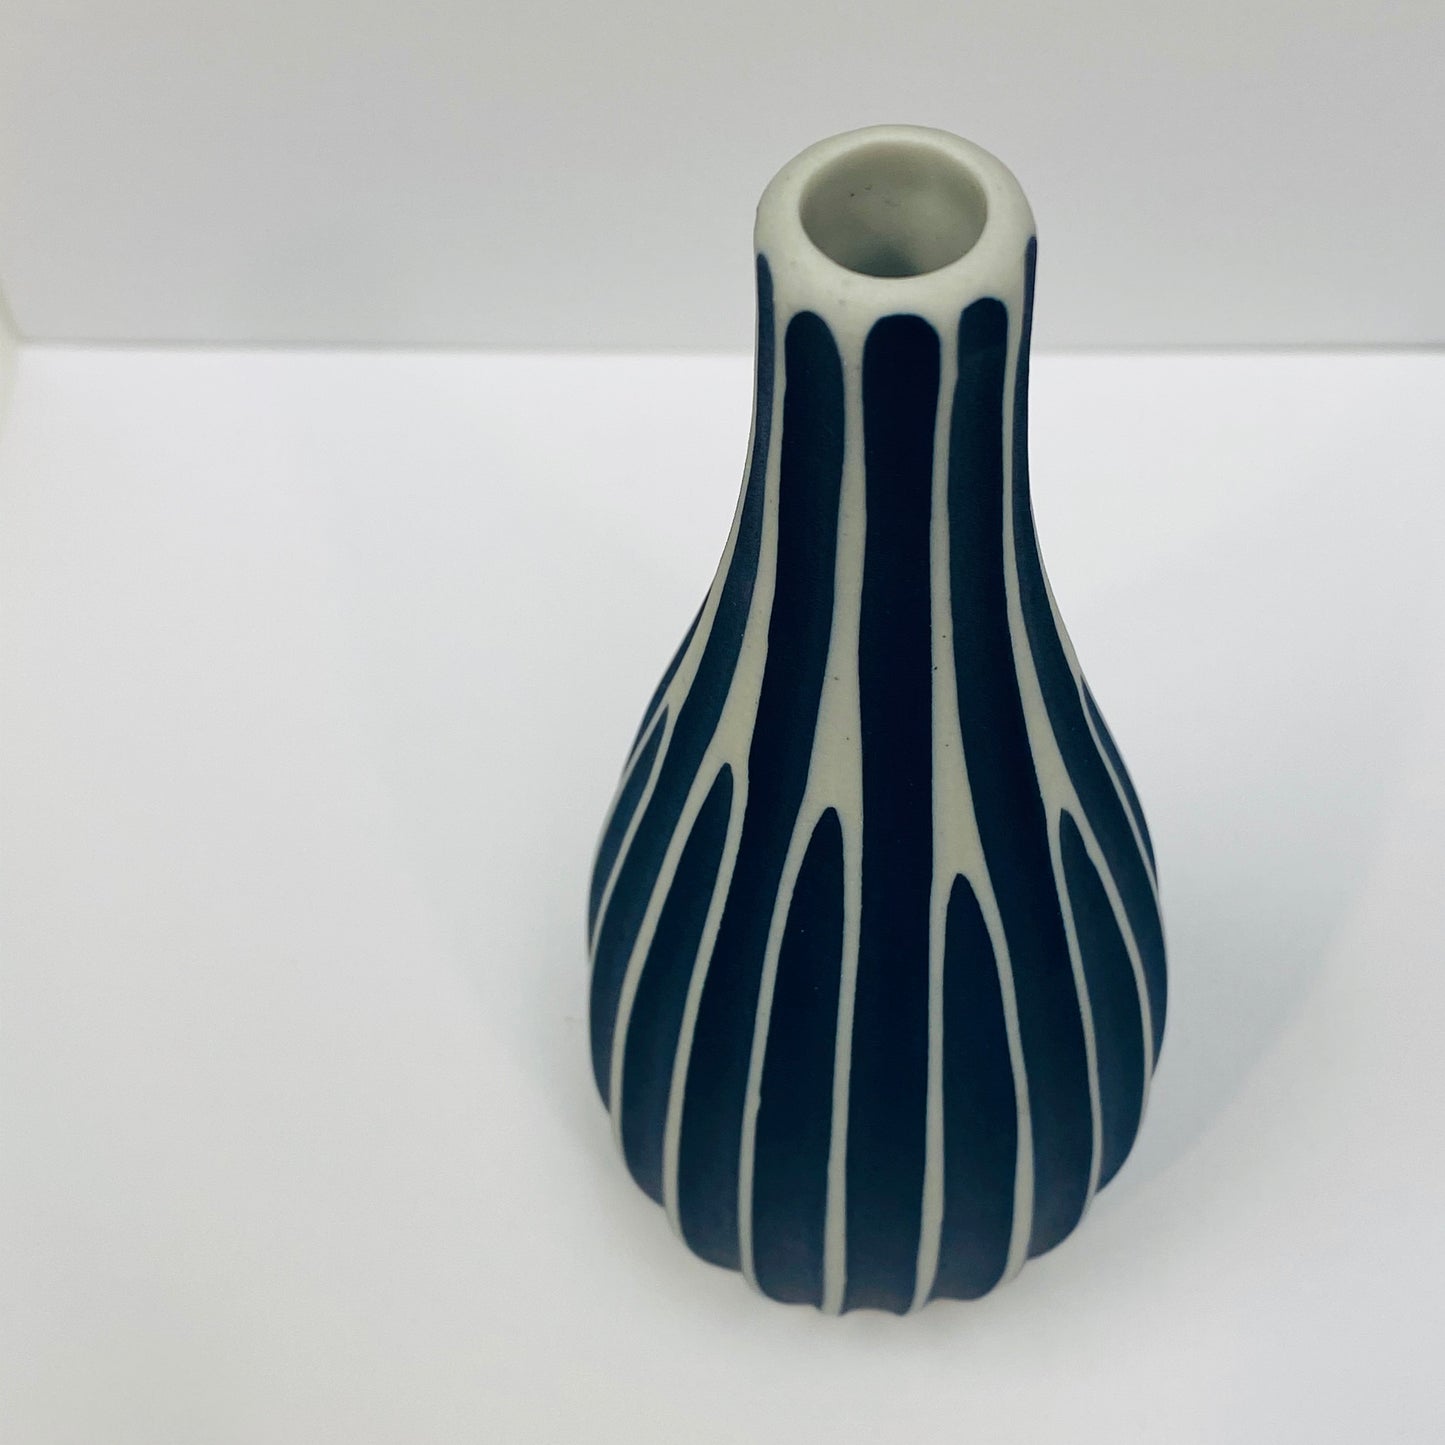 Small White and Blue Textured Bottle Vase